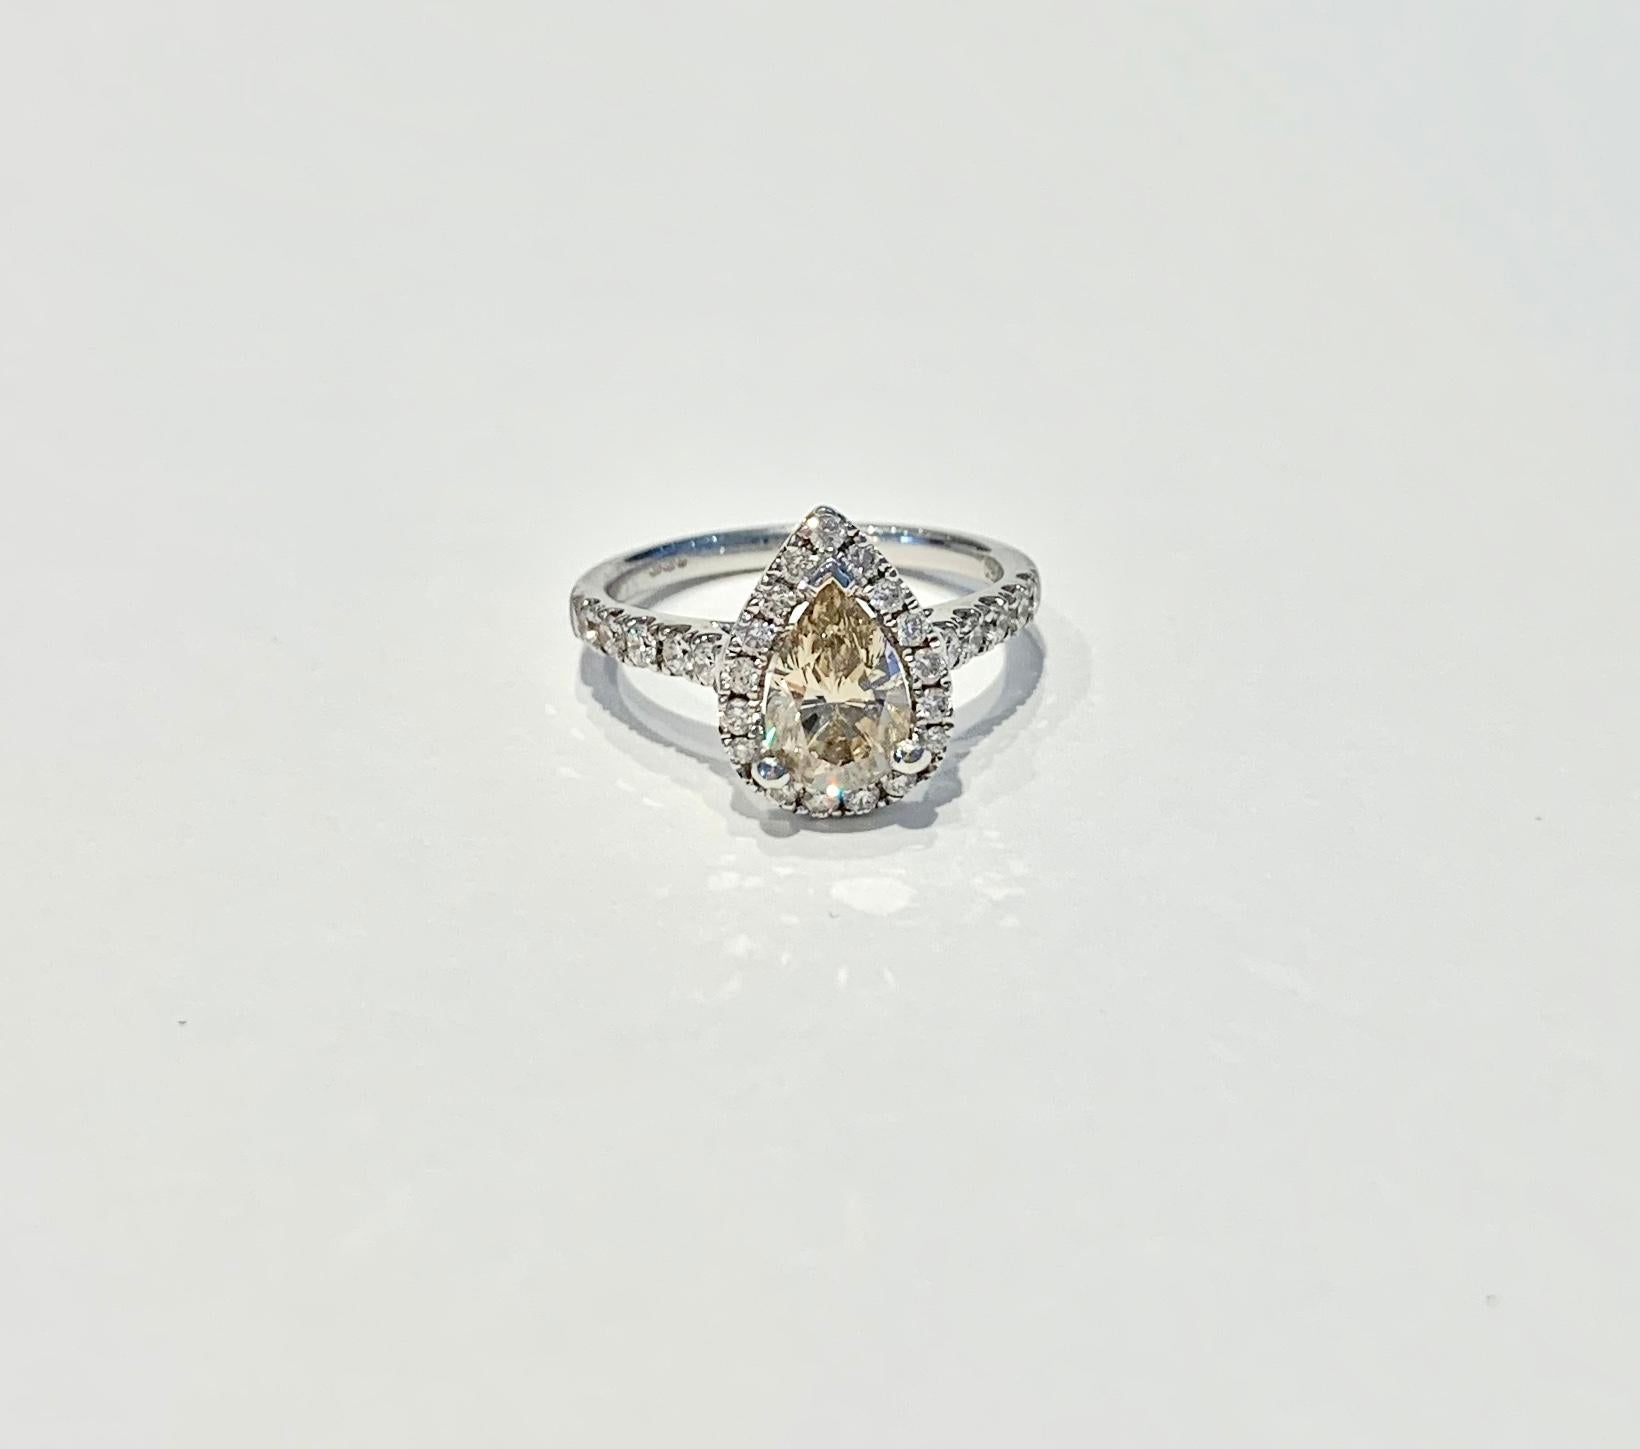 GIA Certified 1.07ct Fancy Brown/Yellow* Pear Cut diamond, set in a diamond halo design in 18ct White Gold.  There is amazing scintillation from both the Pear Cut diamond and the diamonds in the Halo and band.  This ring could make a unique